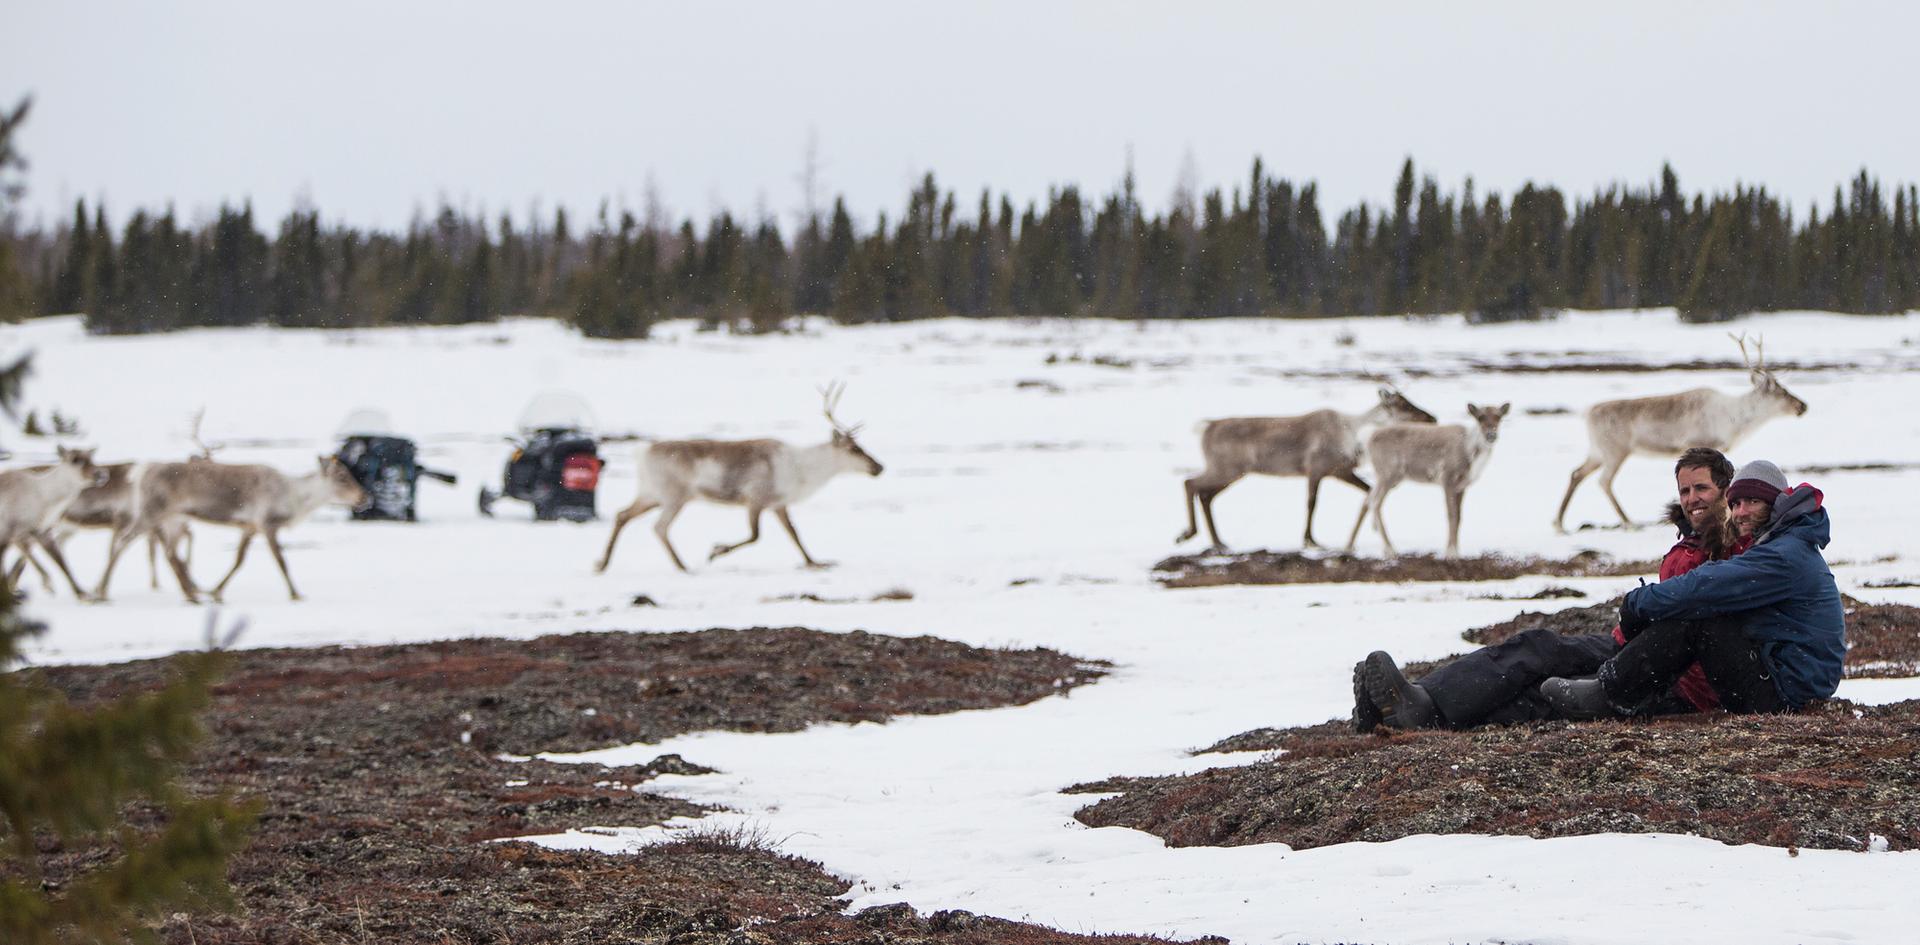 Being surrounded by a herd of migrating caribou will overwhelm and captivate your senses